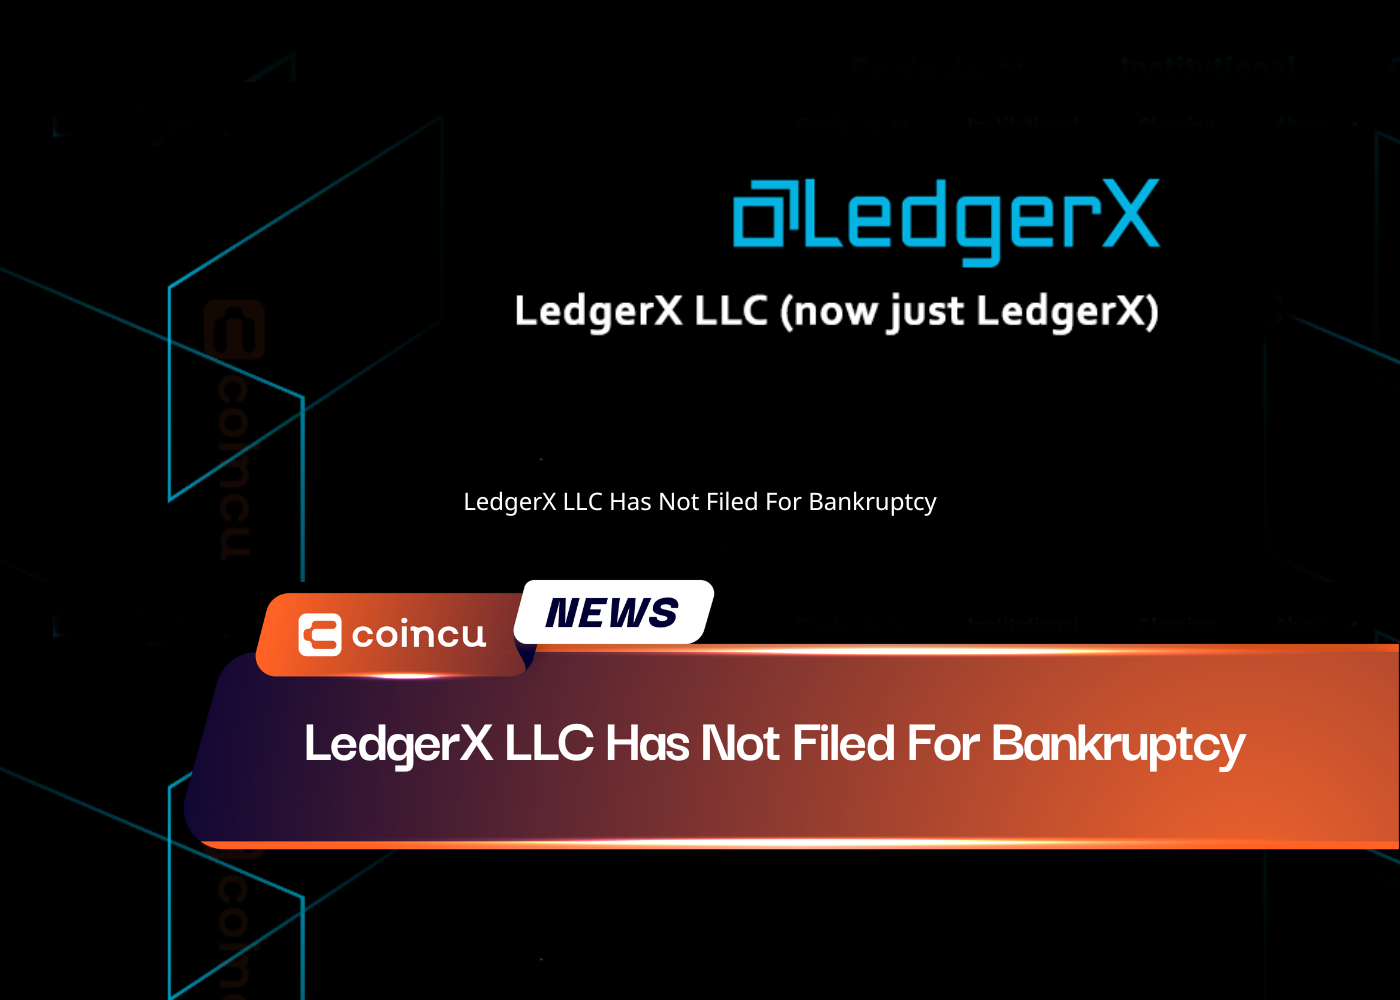 LedgerX LLC Has Not Filed For Bankruptcy